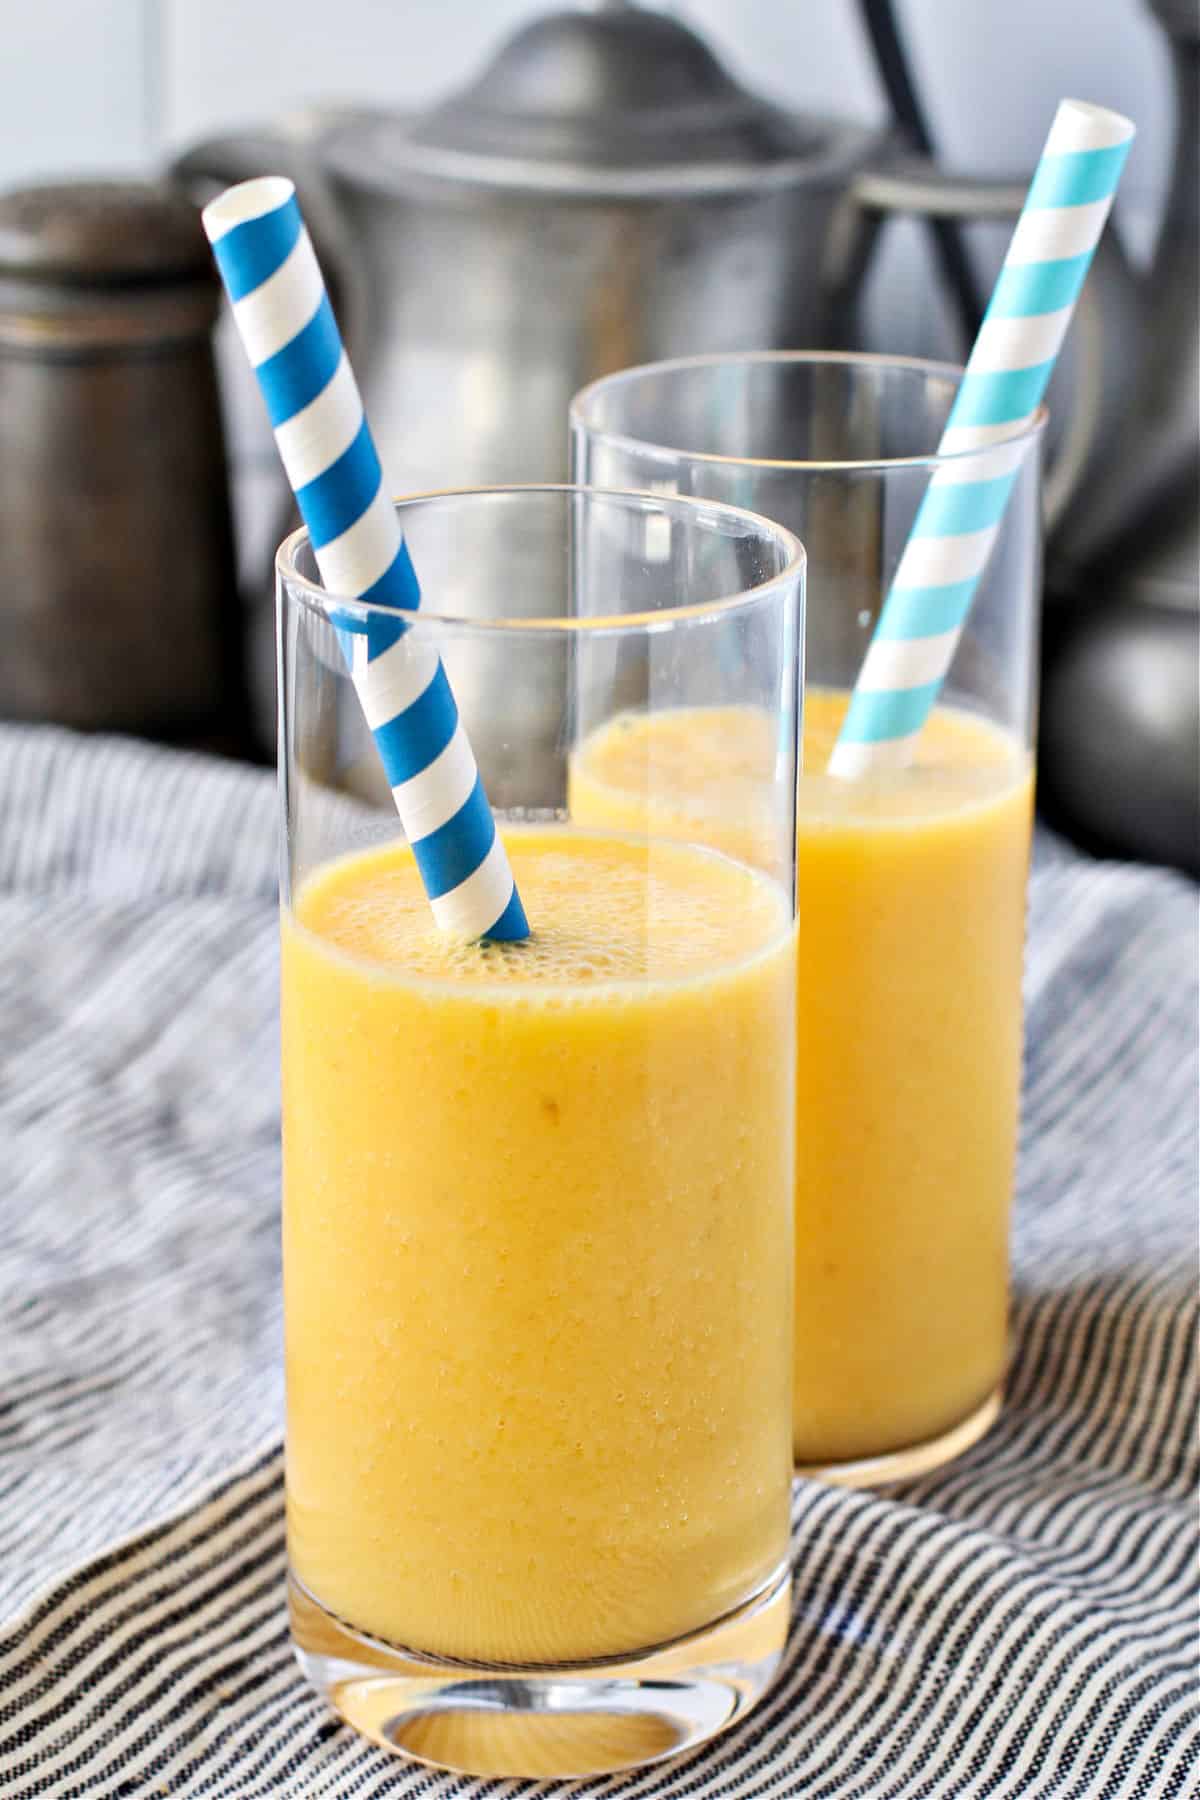 30-Second Smoothies in two glasses and blue striped straws.